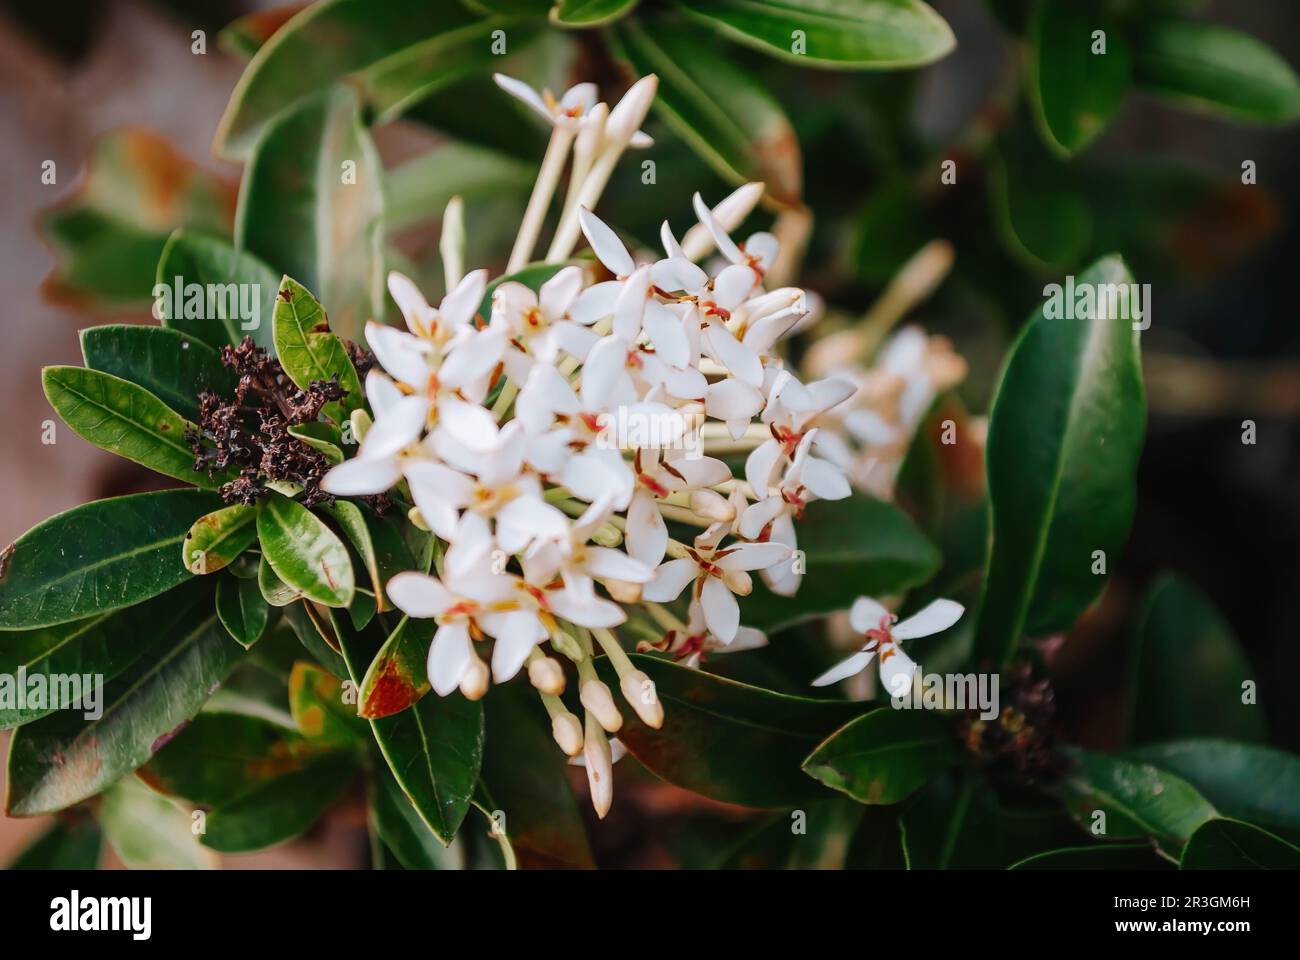 An Acokanthera or usually known as West Indian Jasmine flowers with bokeh or blurred foreground and background Stock Photo